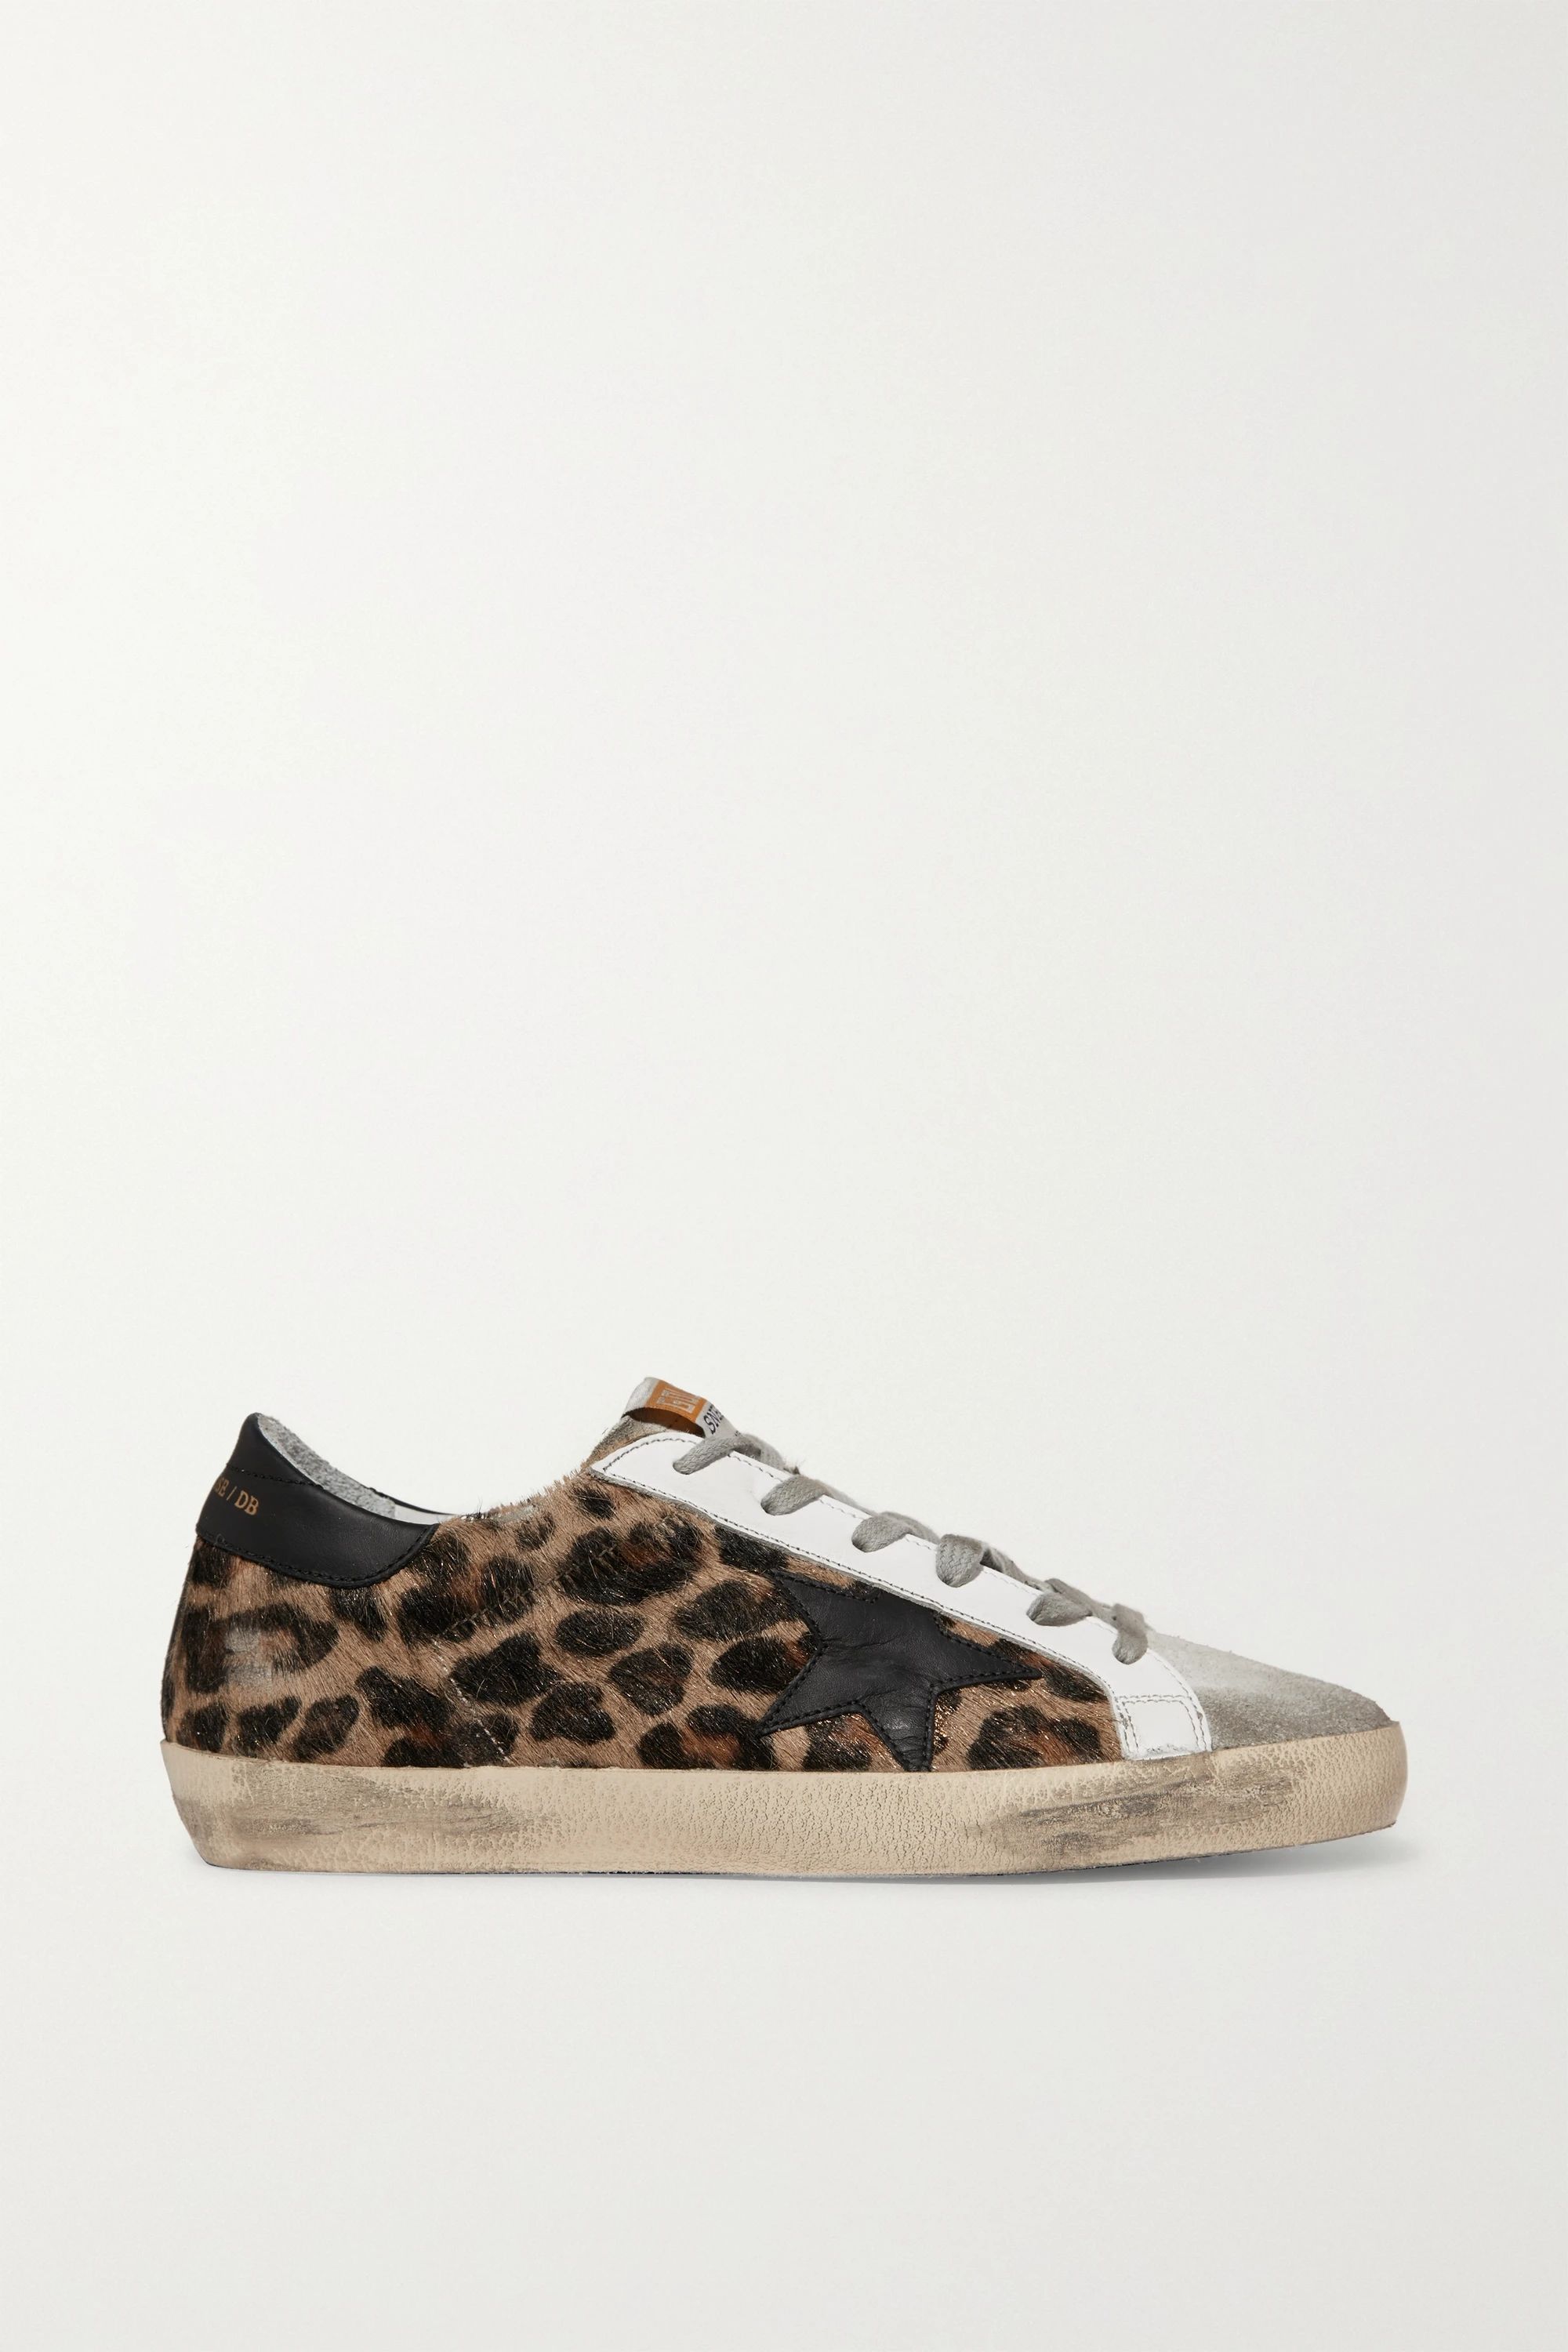 Superstar distressed leopard-print calf hair, leather and suede sneakers | NET-A-PORTER (US)